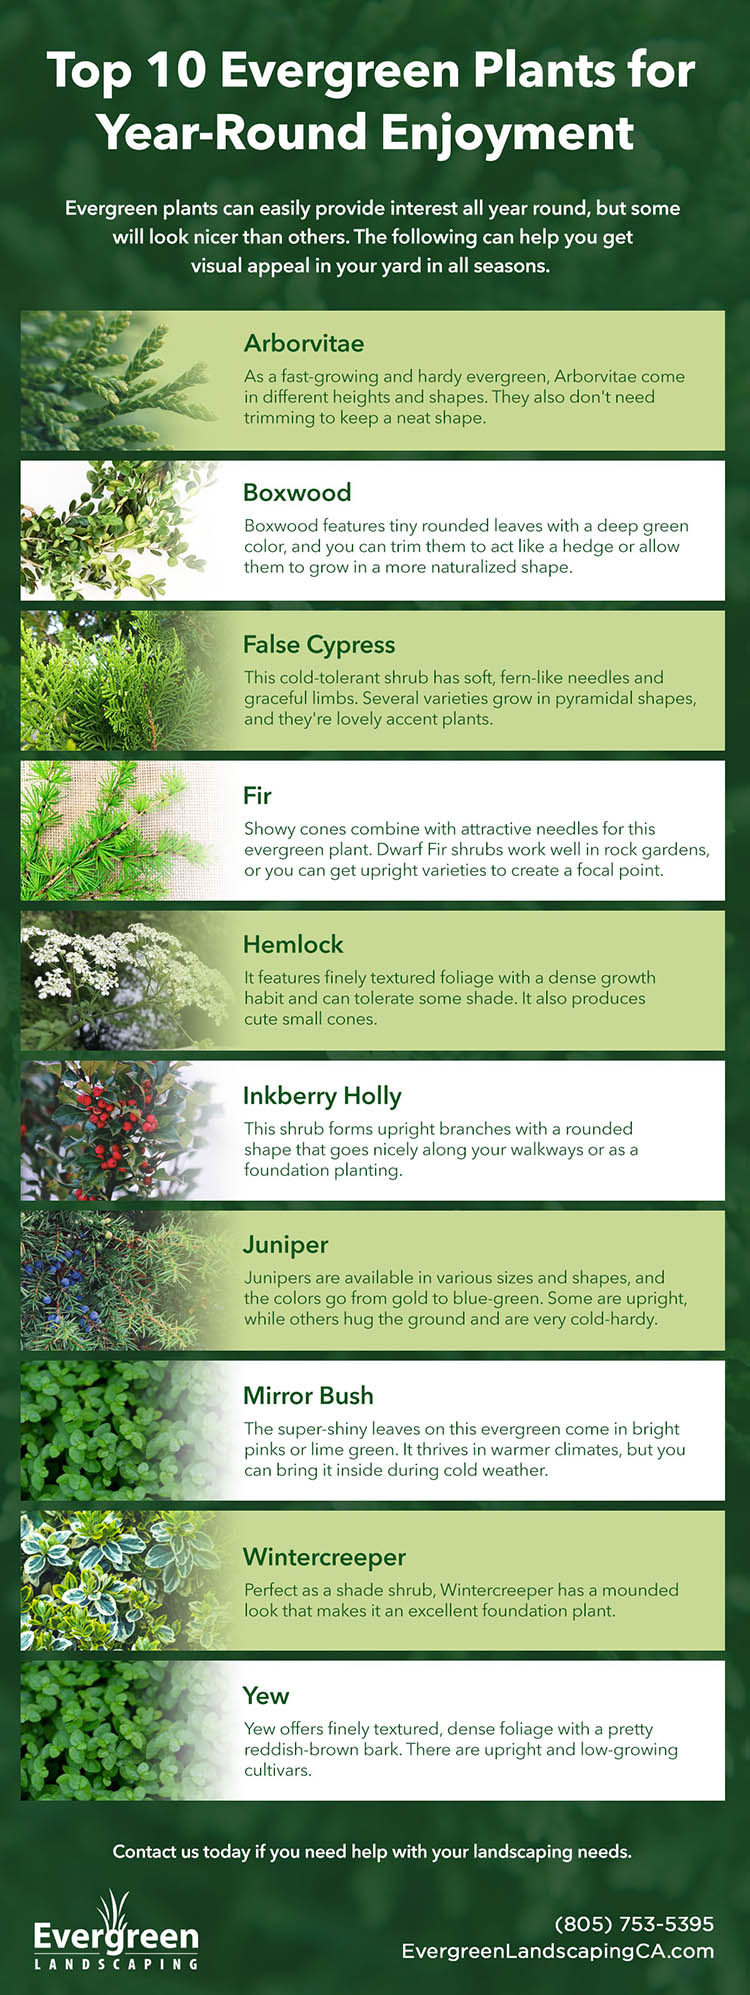 Top 10 Evergreen Plants for Year-Round Enjoyment